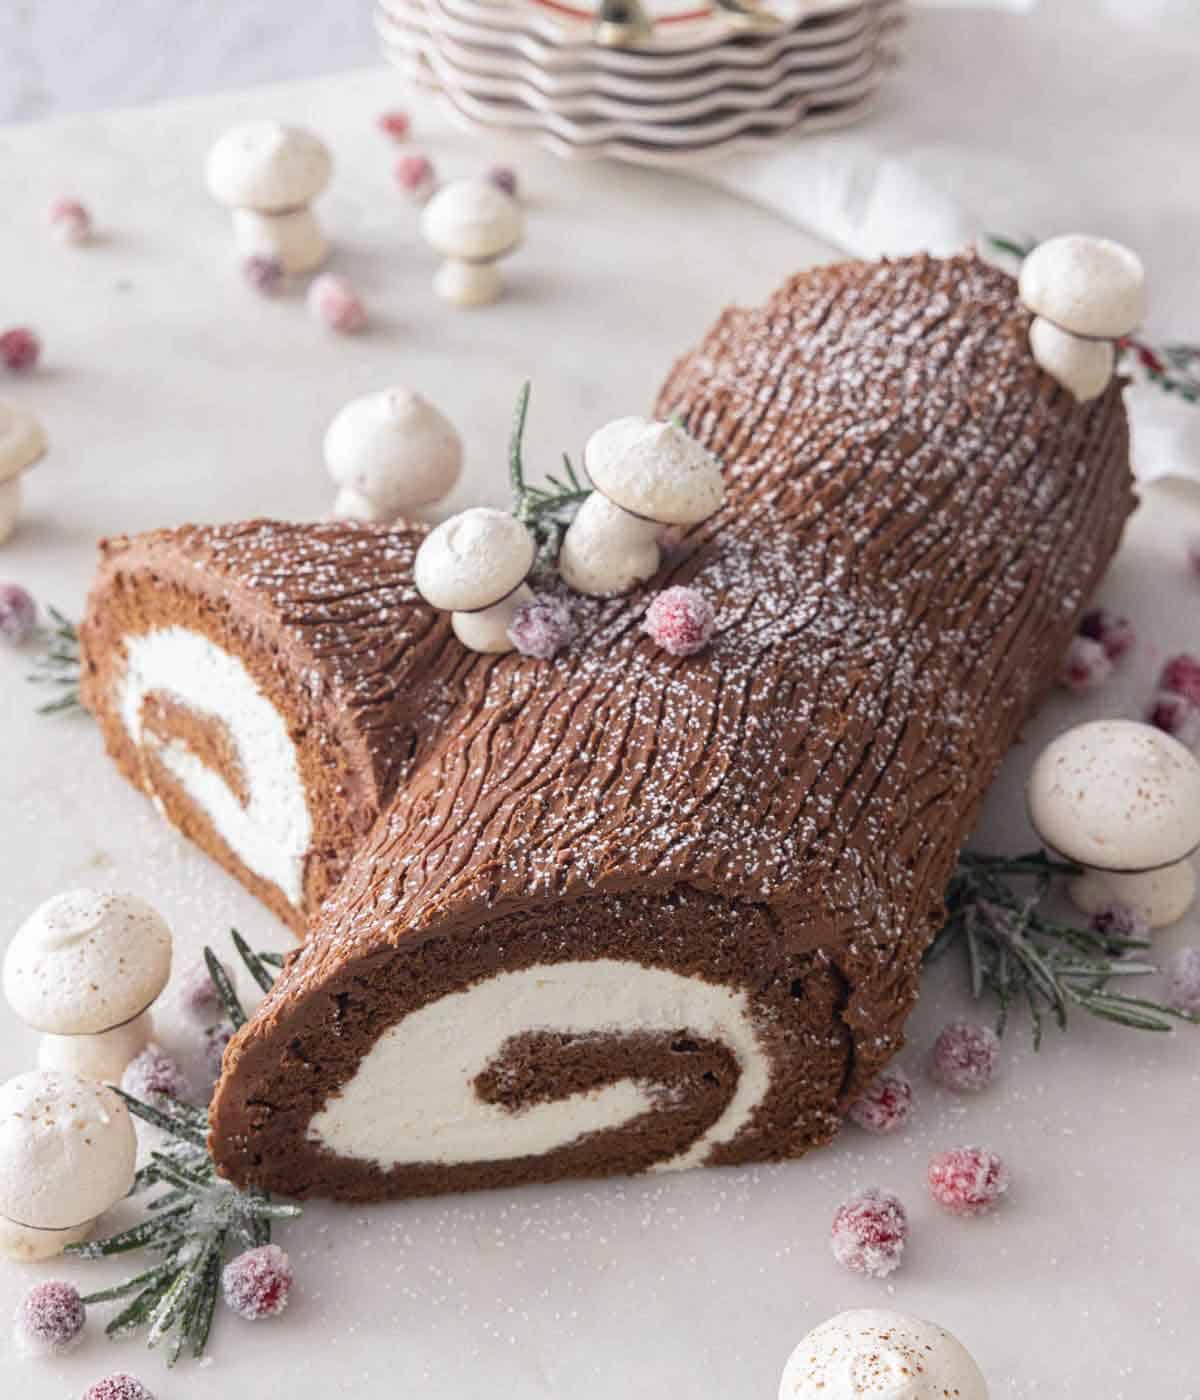 A Yule log cake with meringue mushrooms and sugared rosemary and cranberries.